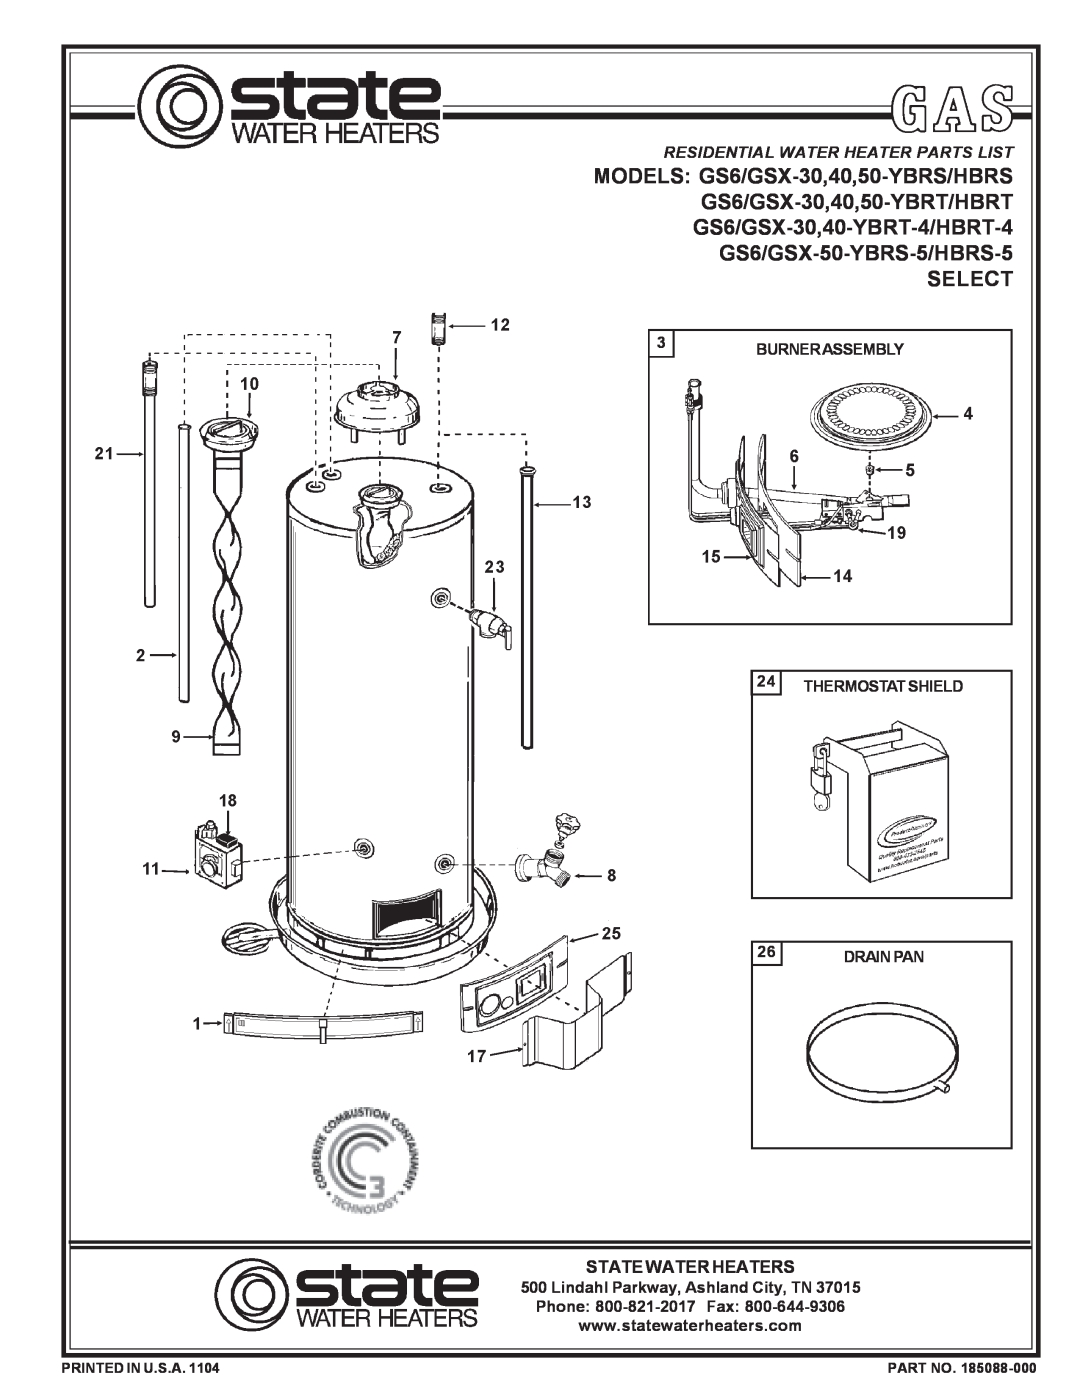 State Industries GS6/GSX-50-YBRS-5/HBRS-5, 40 manual Select, State Water Heaters, Residential Water Heater Parts List 